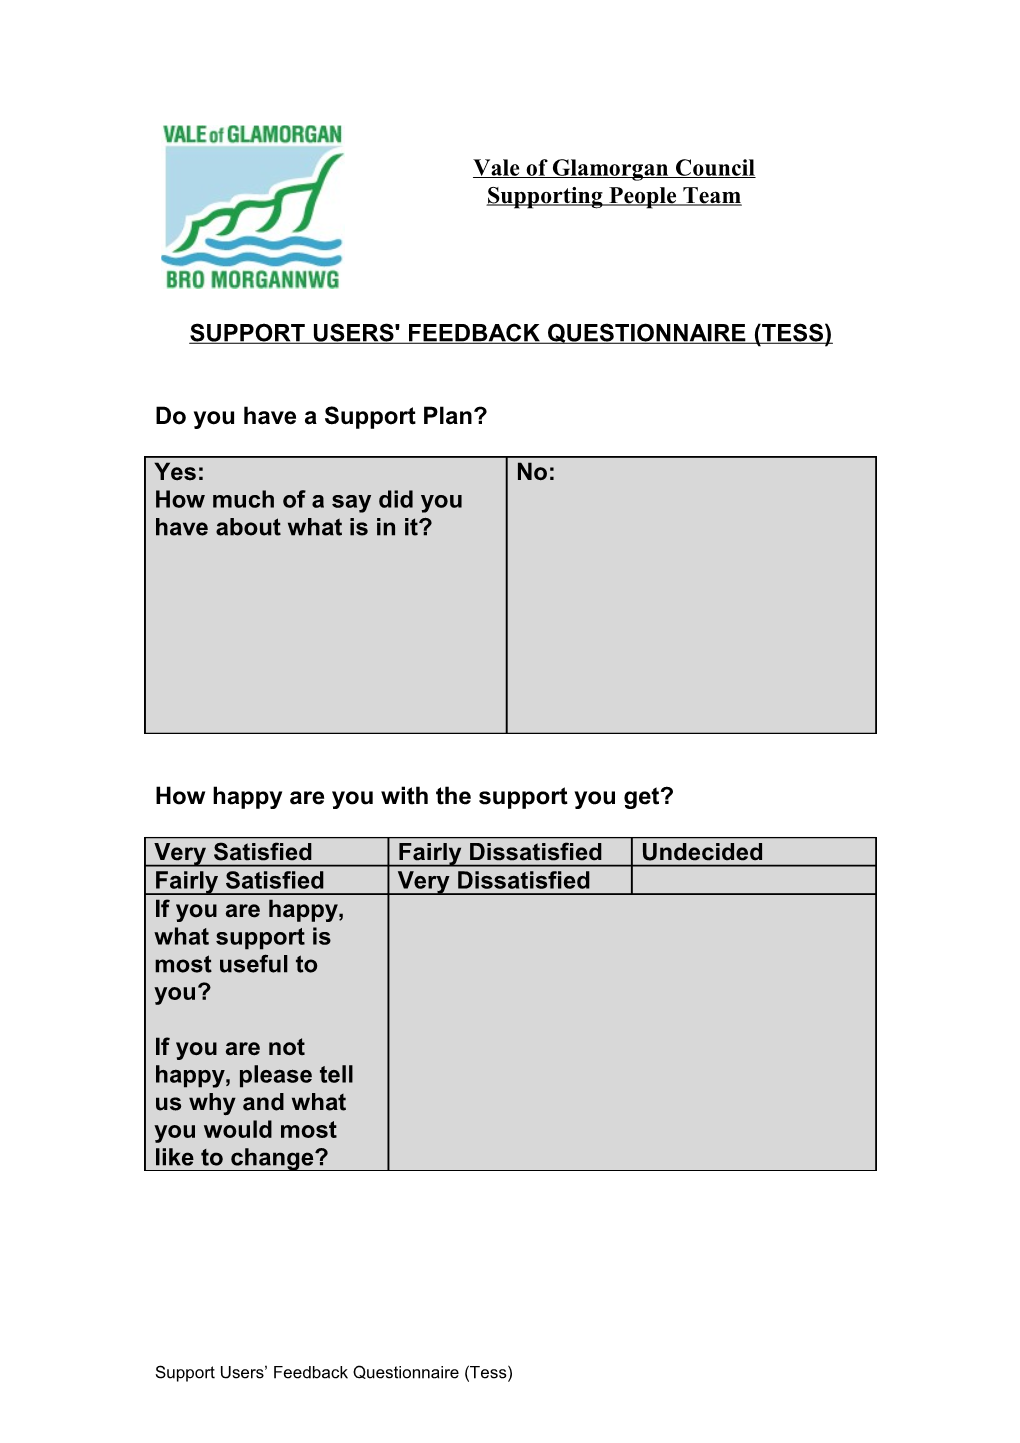 Support Users Feedback Questionnaire - Tess